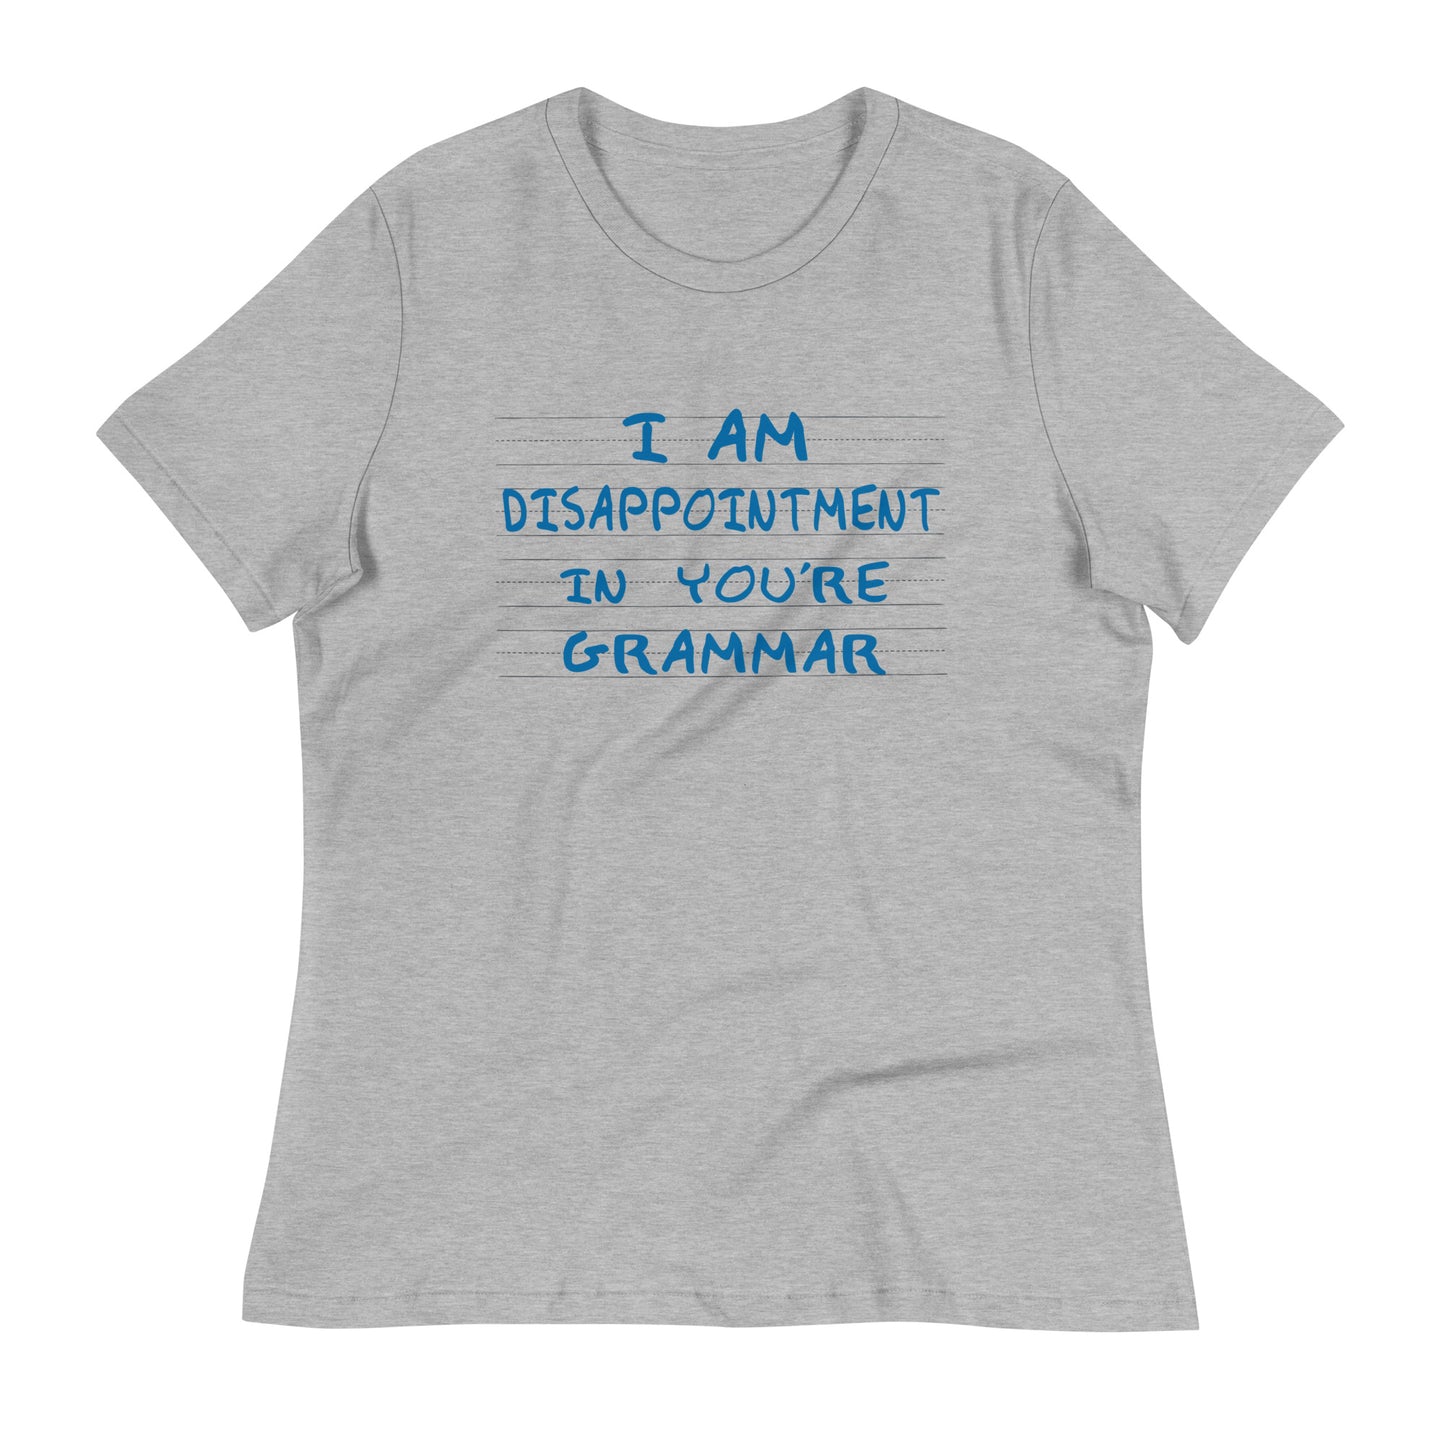 I Am Disappointment Women's Signature Tee